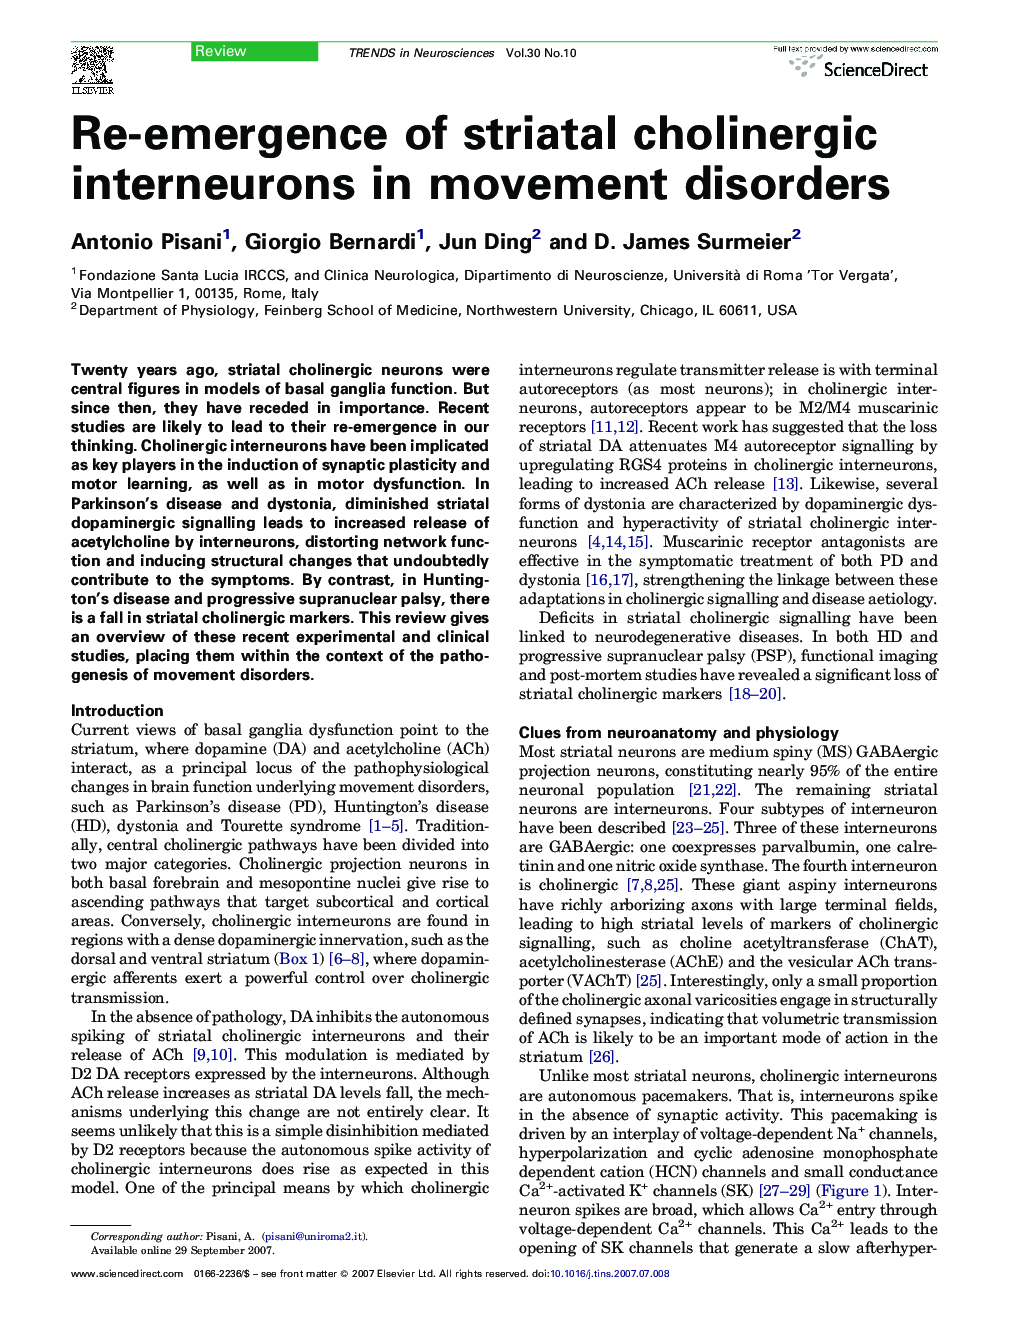 Re-emergence of striatal cholinergic interneurons in movement disorders